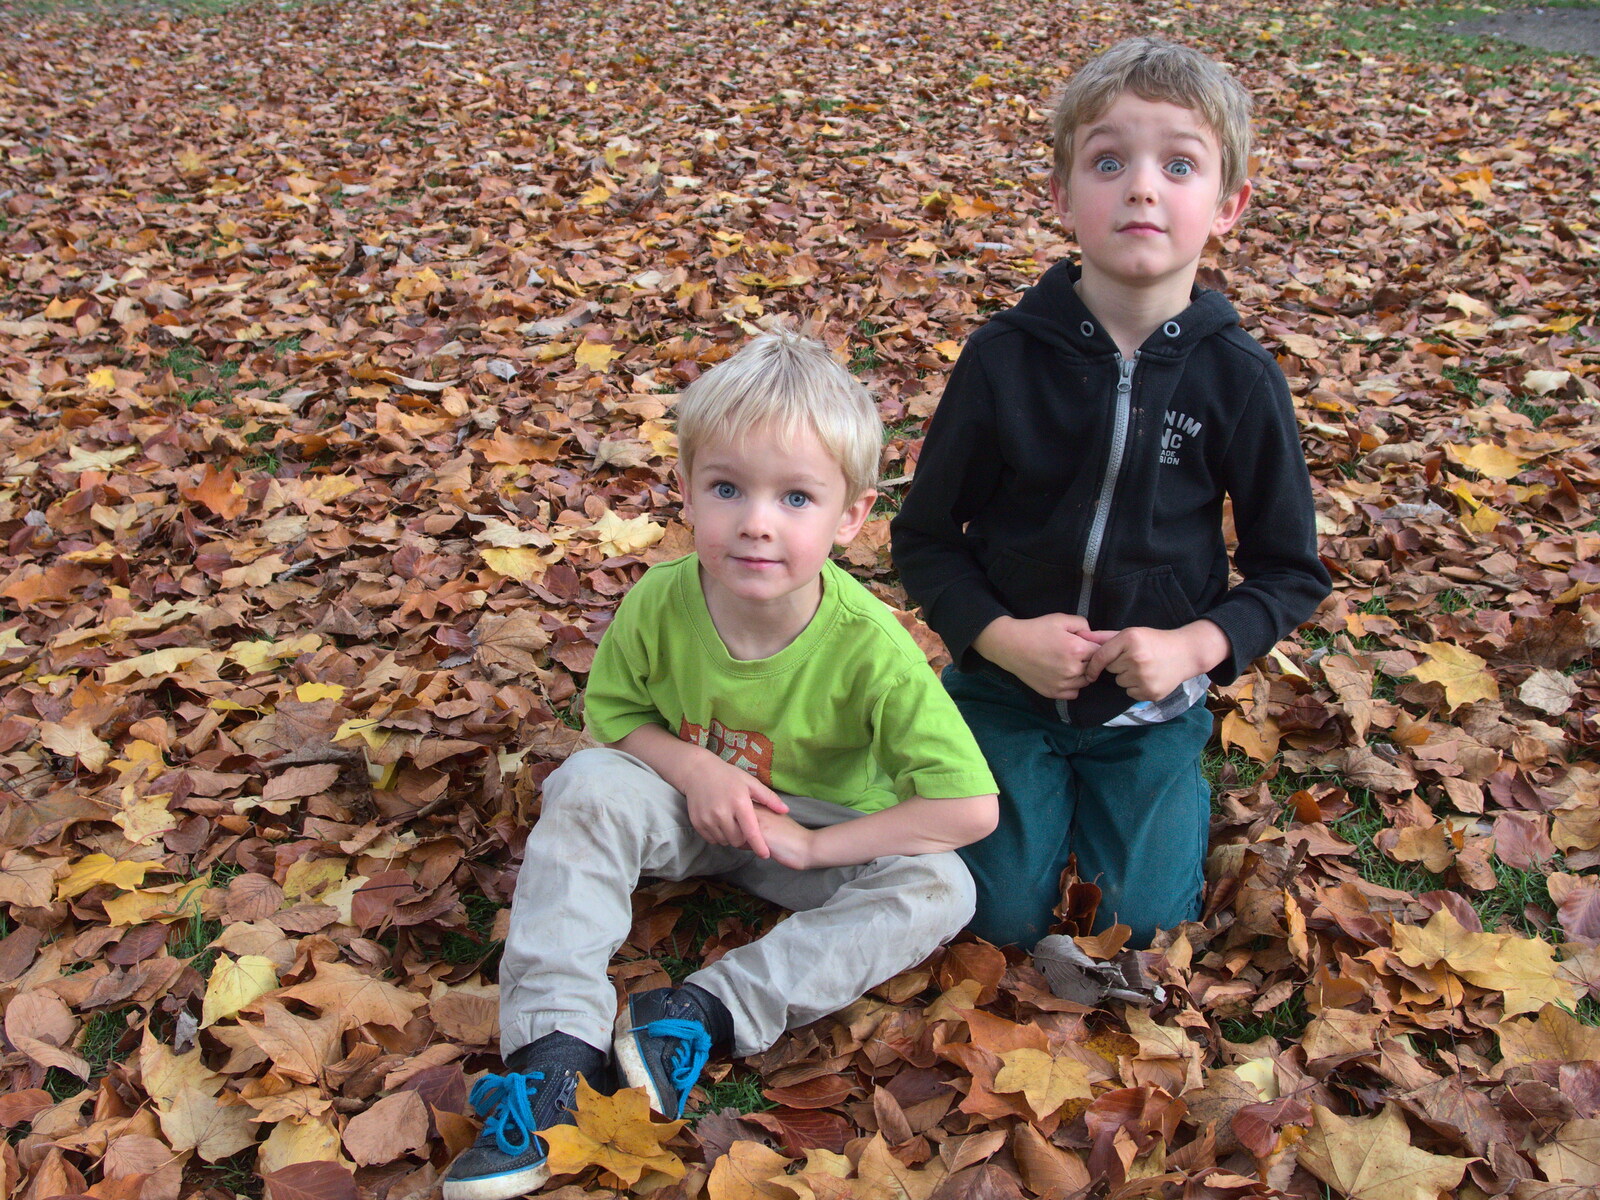 The boys do some faces from Abbey Gardens in Autumn, Bury St. Edmunds, Suffolk - 27th October 2015